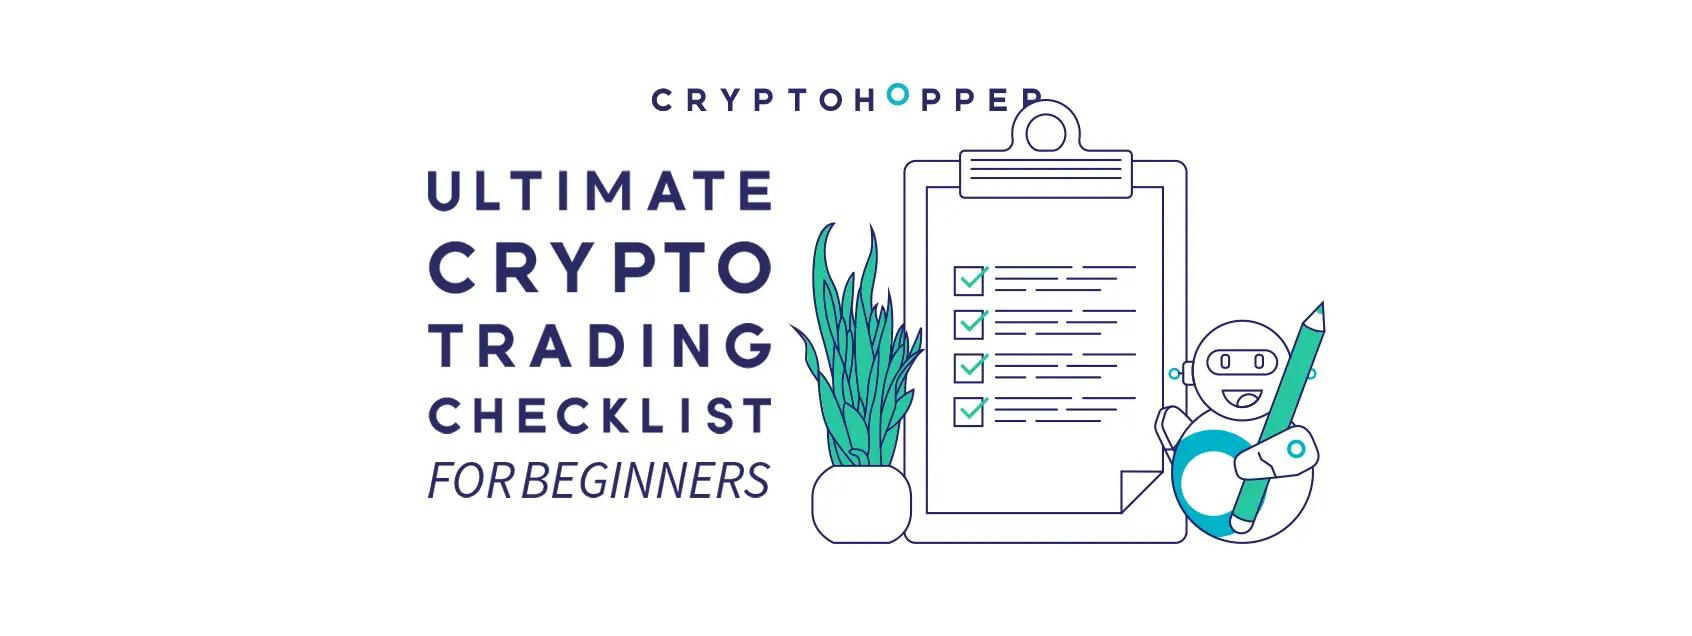 The Ultimate Crypto Trading Checklist for Beginners 2023